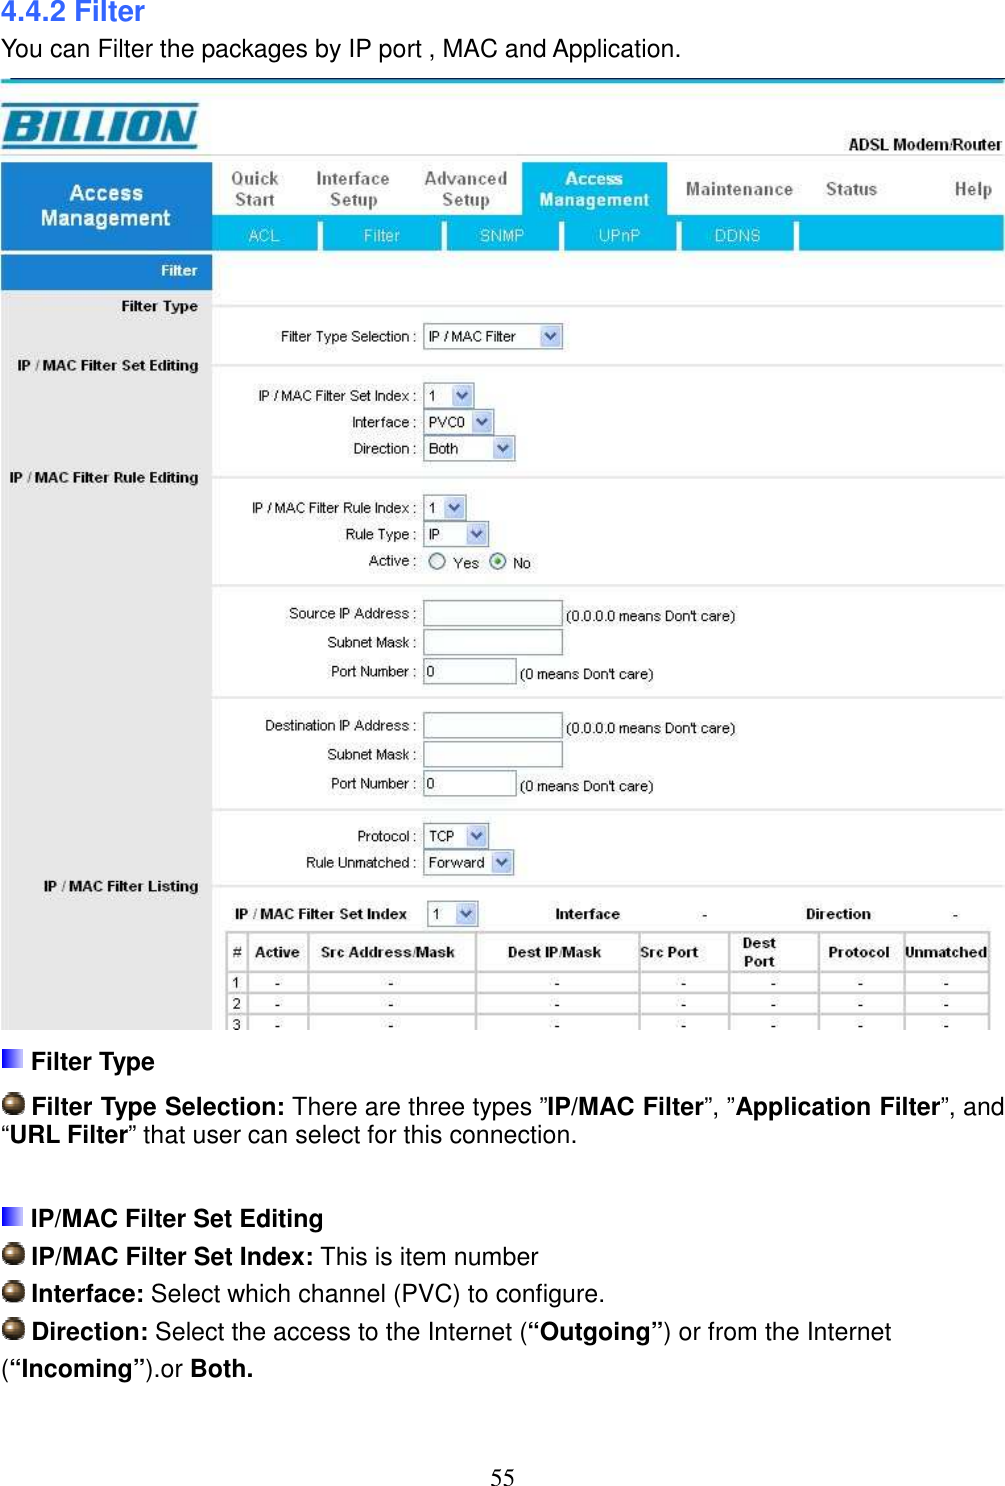 55 4.4.2 Filter You can Filter the packages by IP port , MAC and Application.   Filter Type  Filter Type Selection: There are three types ”IP/MAC Filter”, ”Application Filter”, and “URL Filter” that user can select for this connection.   IP/MAC Filter Set Editing  IP/MAC Filter Set Index: This is item number  Interface: Select which channel (PVC) to configure.  Direction: Select the access to the Internet (“Outgoing”) or from the Internet (“Incoming”).or Both.  